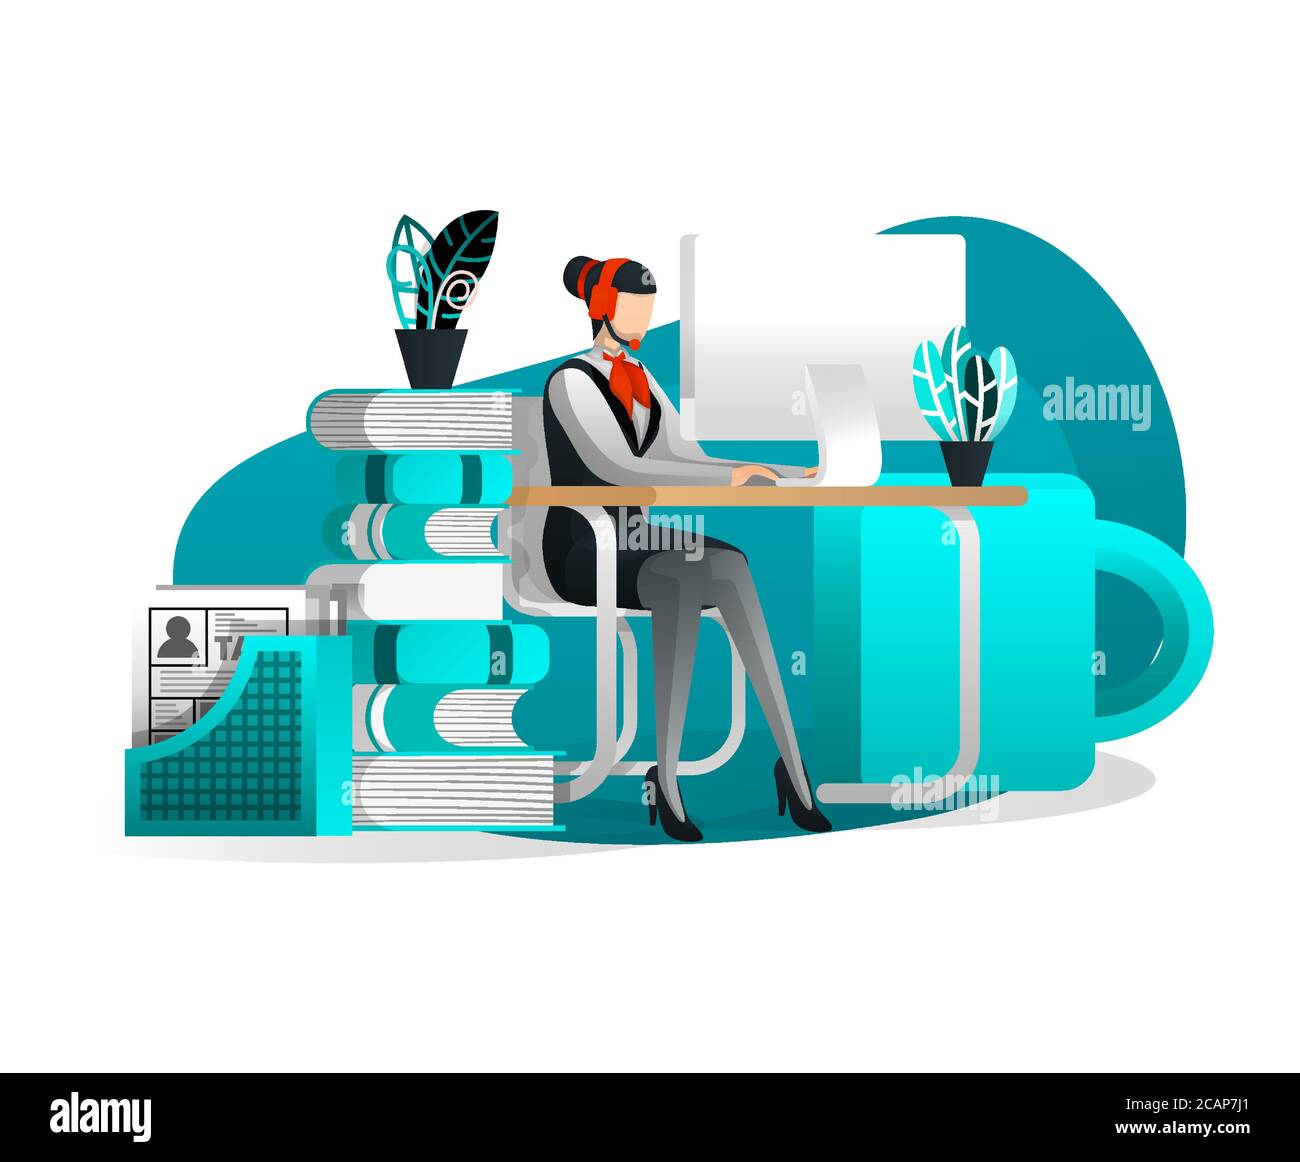 Vector Illustration For Web Page, Banner, Presentation, Social Media, UI. Women Technical Support Working at Desk. Concept of Ideas from Advice, Help, Stock Vector